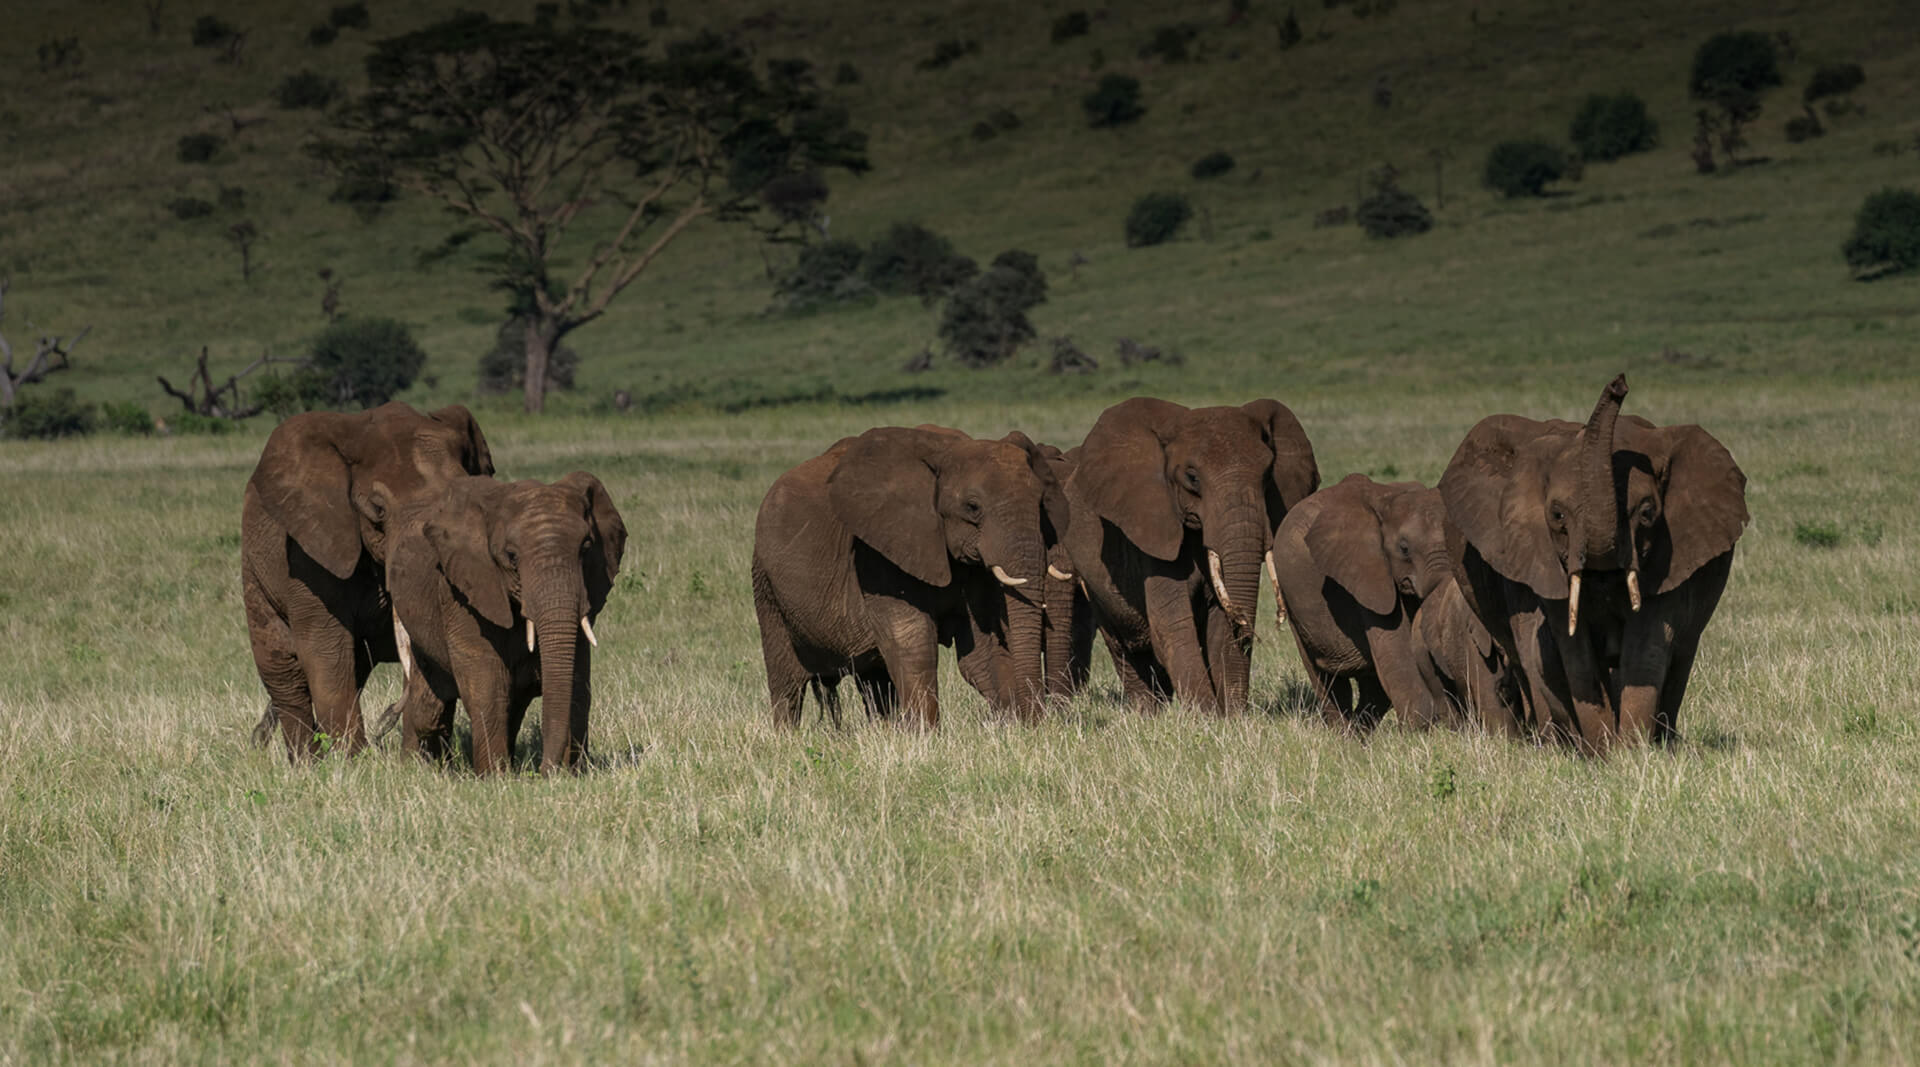 A group of elephants in the distance standing in a grass field